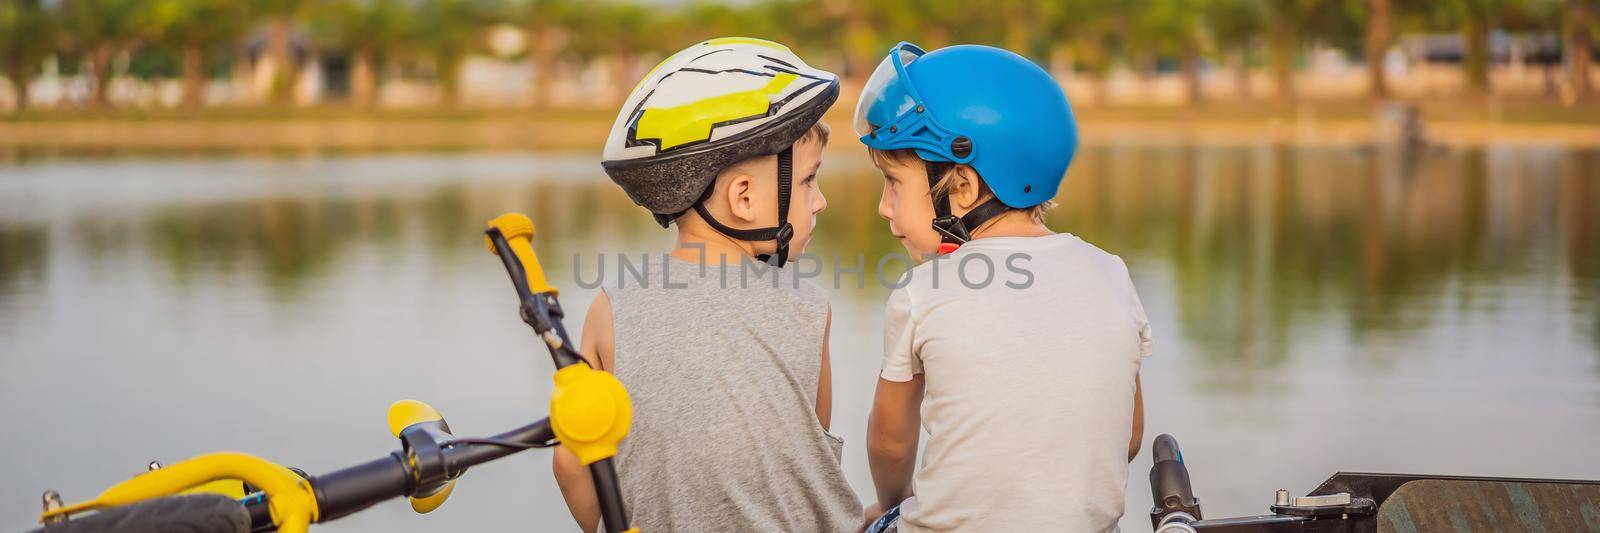 Two boys sit on the shore of the lake after riding a bike and scooter BANNER, LONG FORMAT by galitskaya